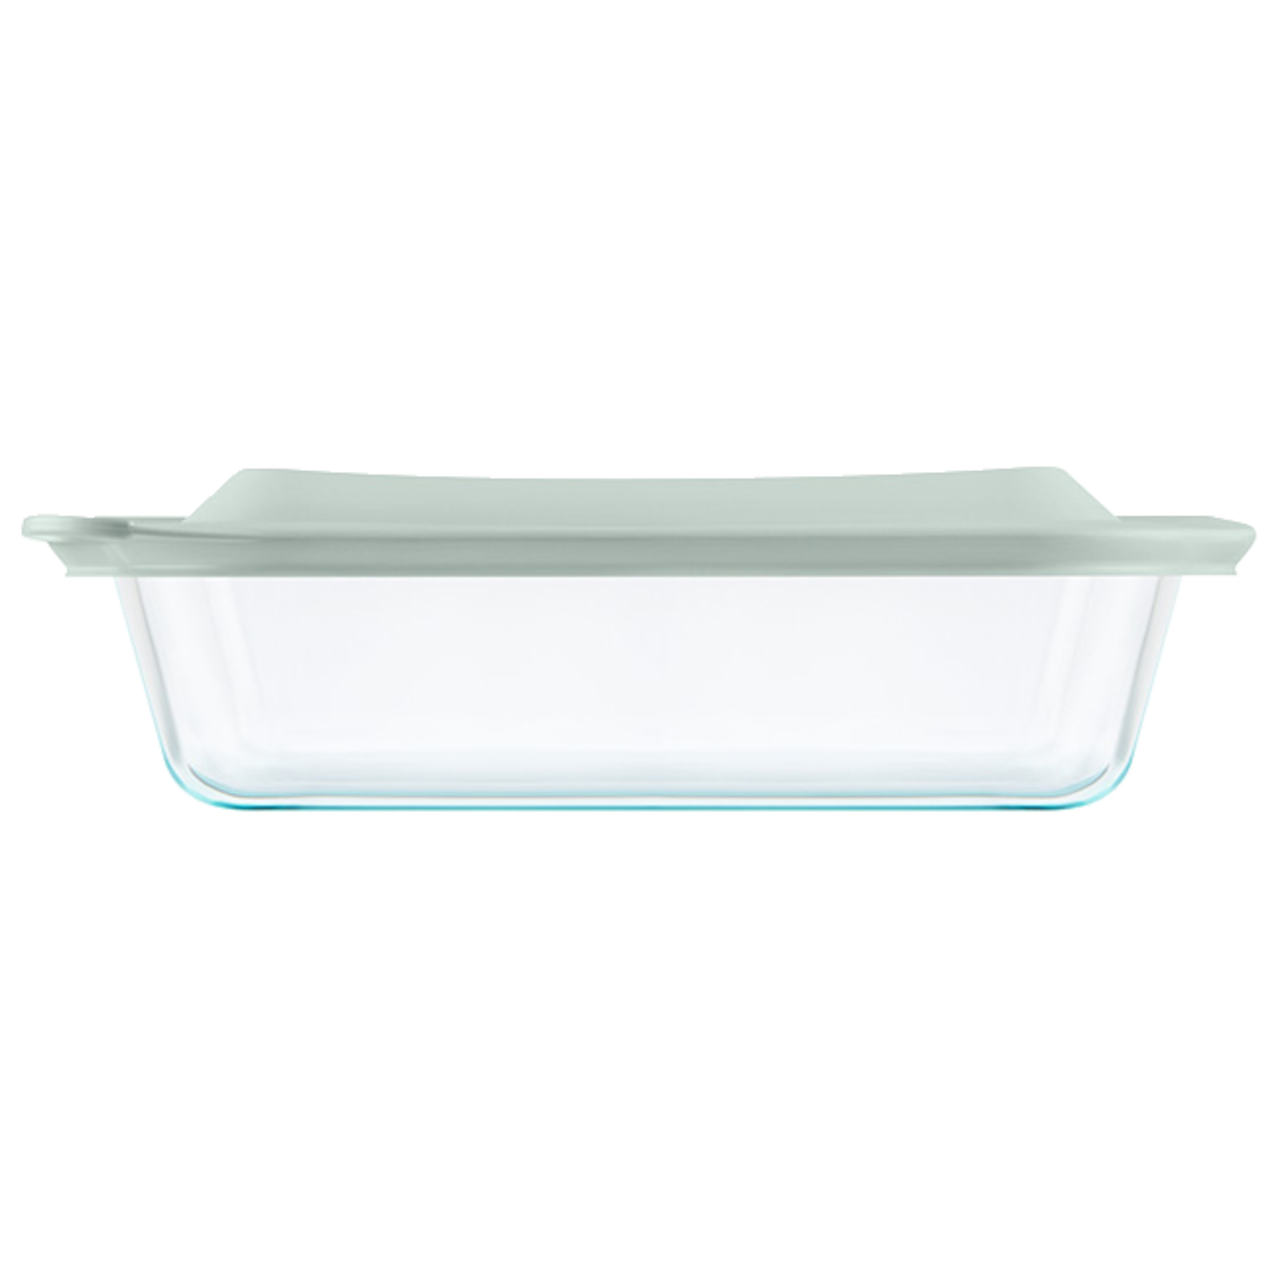 https://media-www.canadiantire.ca/product/living/kitchen/bakeware-baking-prep/1429692/pyrex-deep-7x11-baker-7c36422d-28f8-4e11-89e1-dac928d61cce.png?imdensity=1&imwidth=1244&impolicy=mZoom